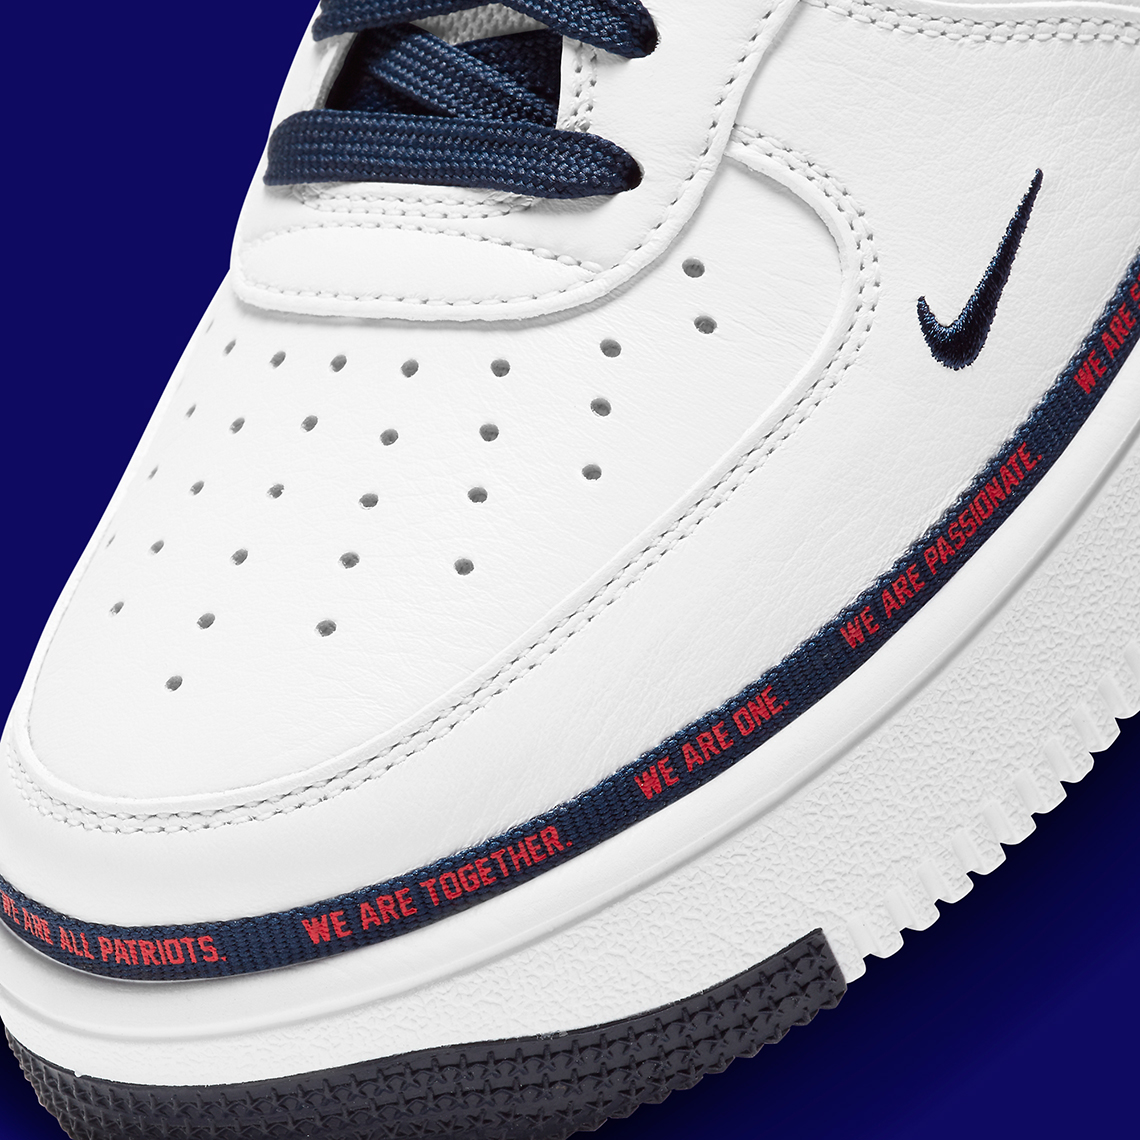 Nike Air Force 1 Ultraforce QS New England Patriots Sneakers - Farfetch